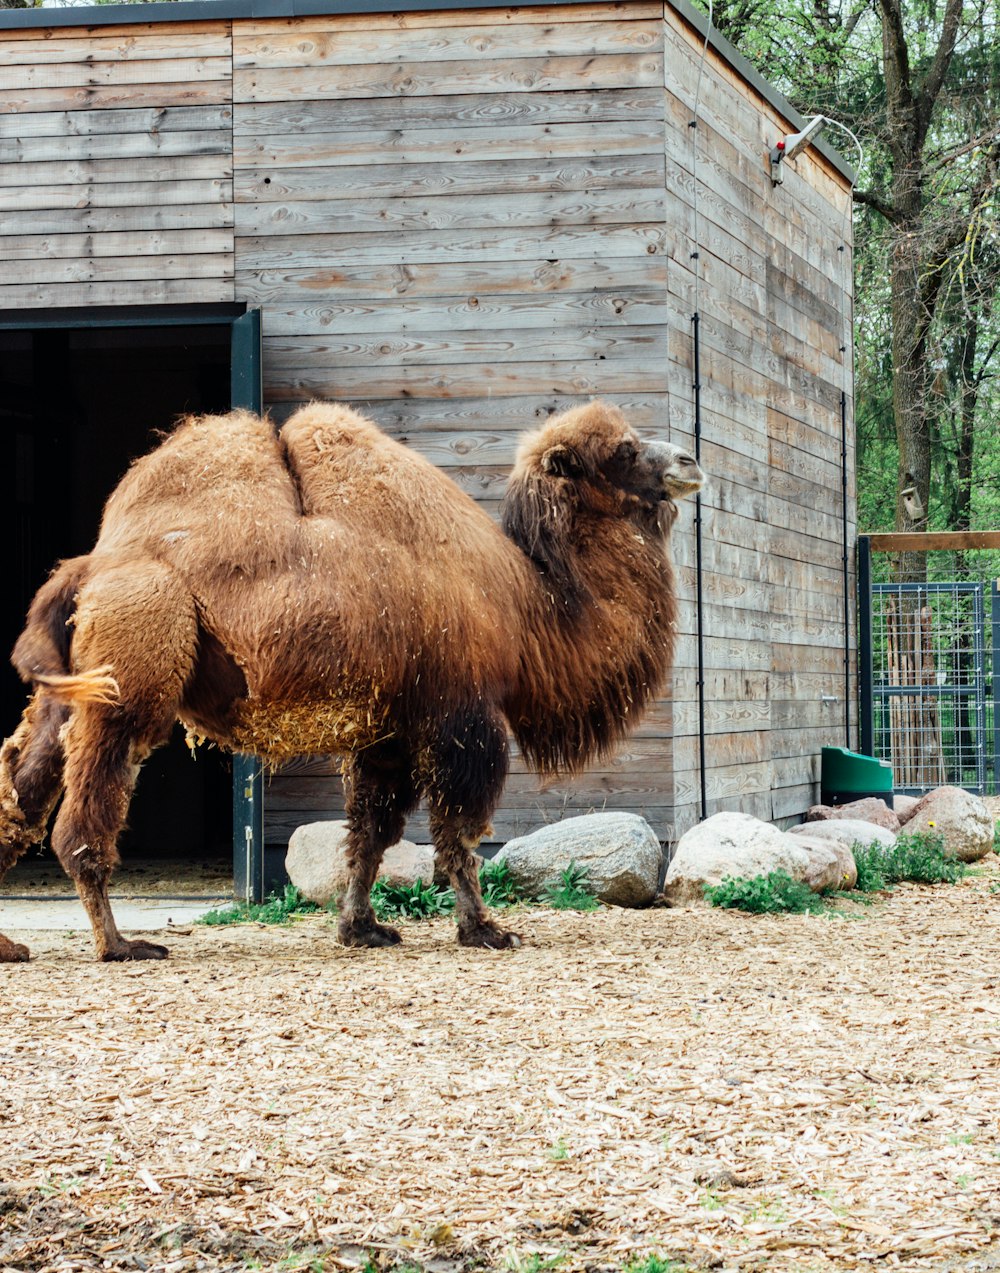 a camel standing in front of a wooden building